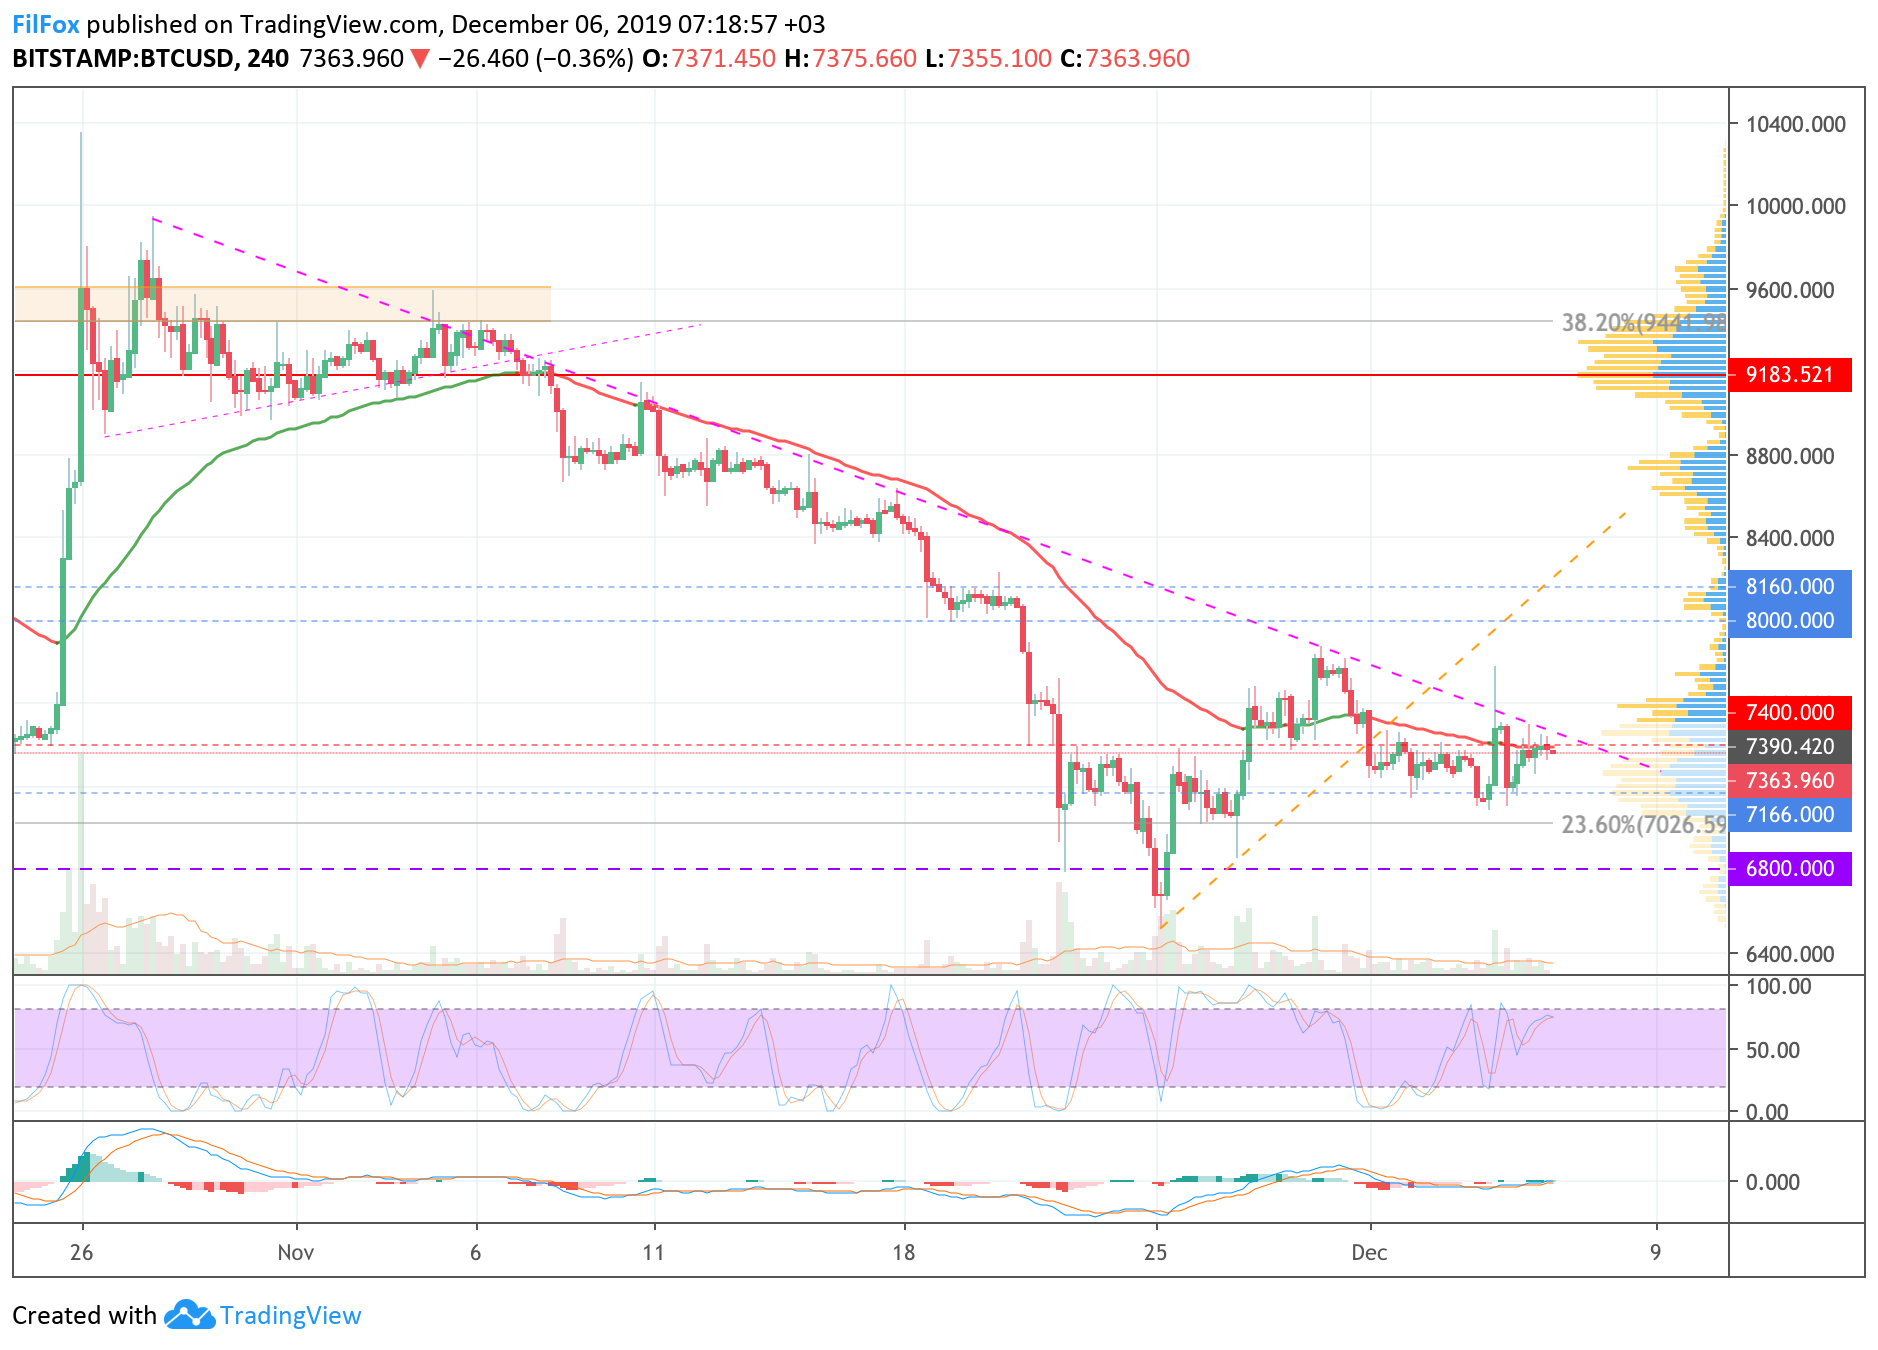 Analysis of cryptocurrency pairs BTC / USD, ETH / USD and XRP / USD on 12/06/2019